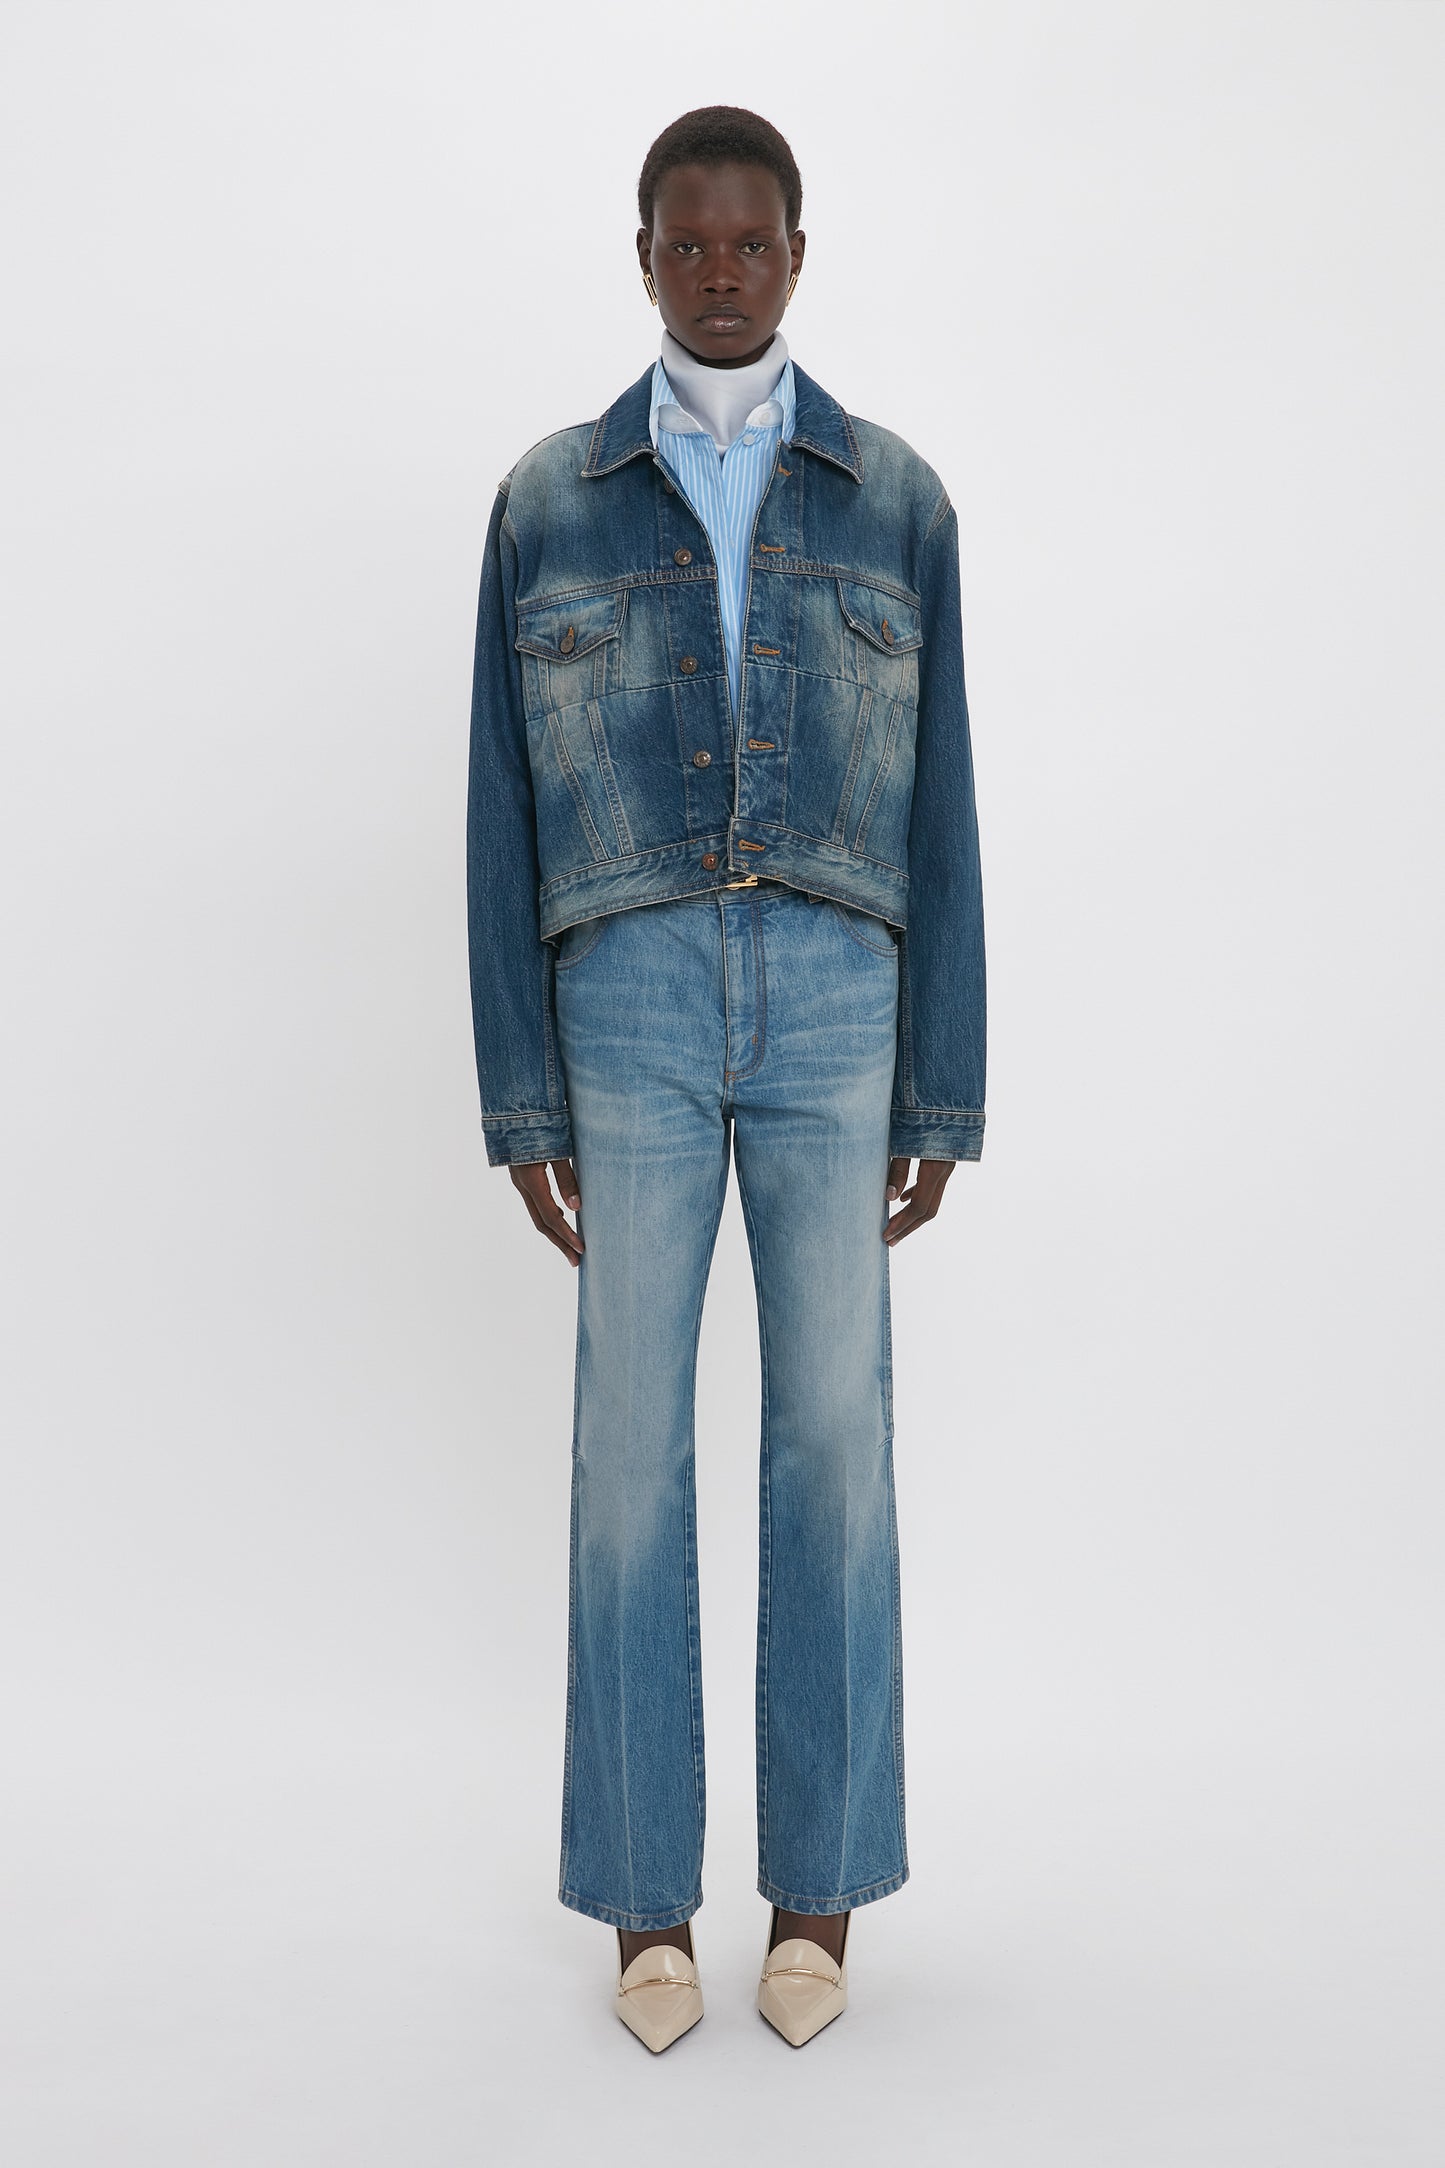 A standing person wearing a denim jacket over a blue striped shirt, paired with Relaxed Flared Jean In Broken Vintage Wash by Victoria Beckham featuring deconstructed detailing and beige pointed shoes, against a plain white background.